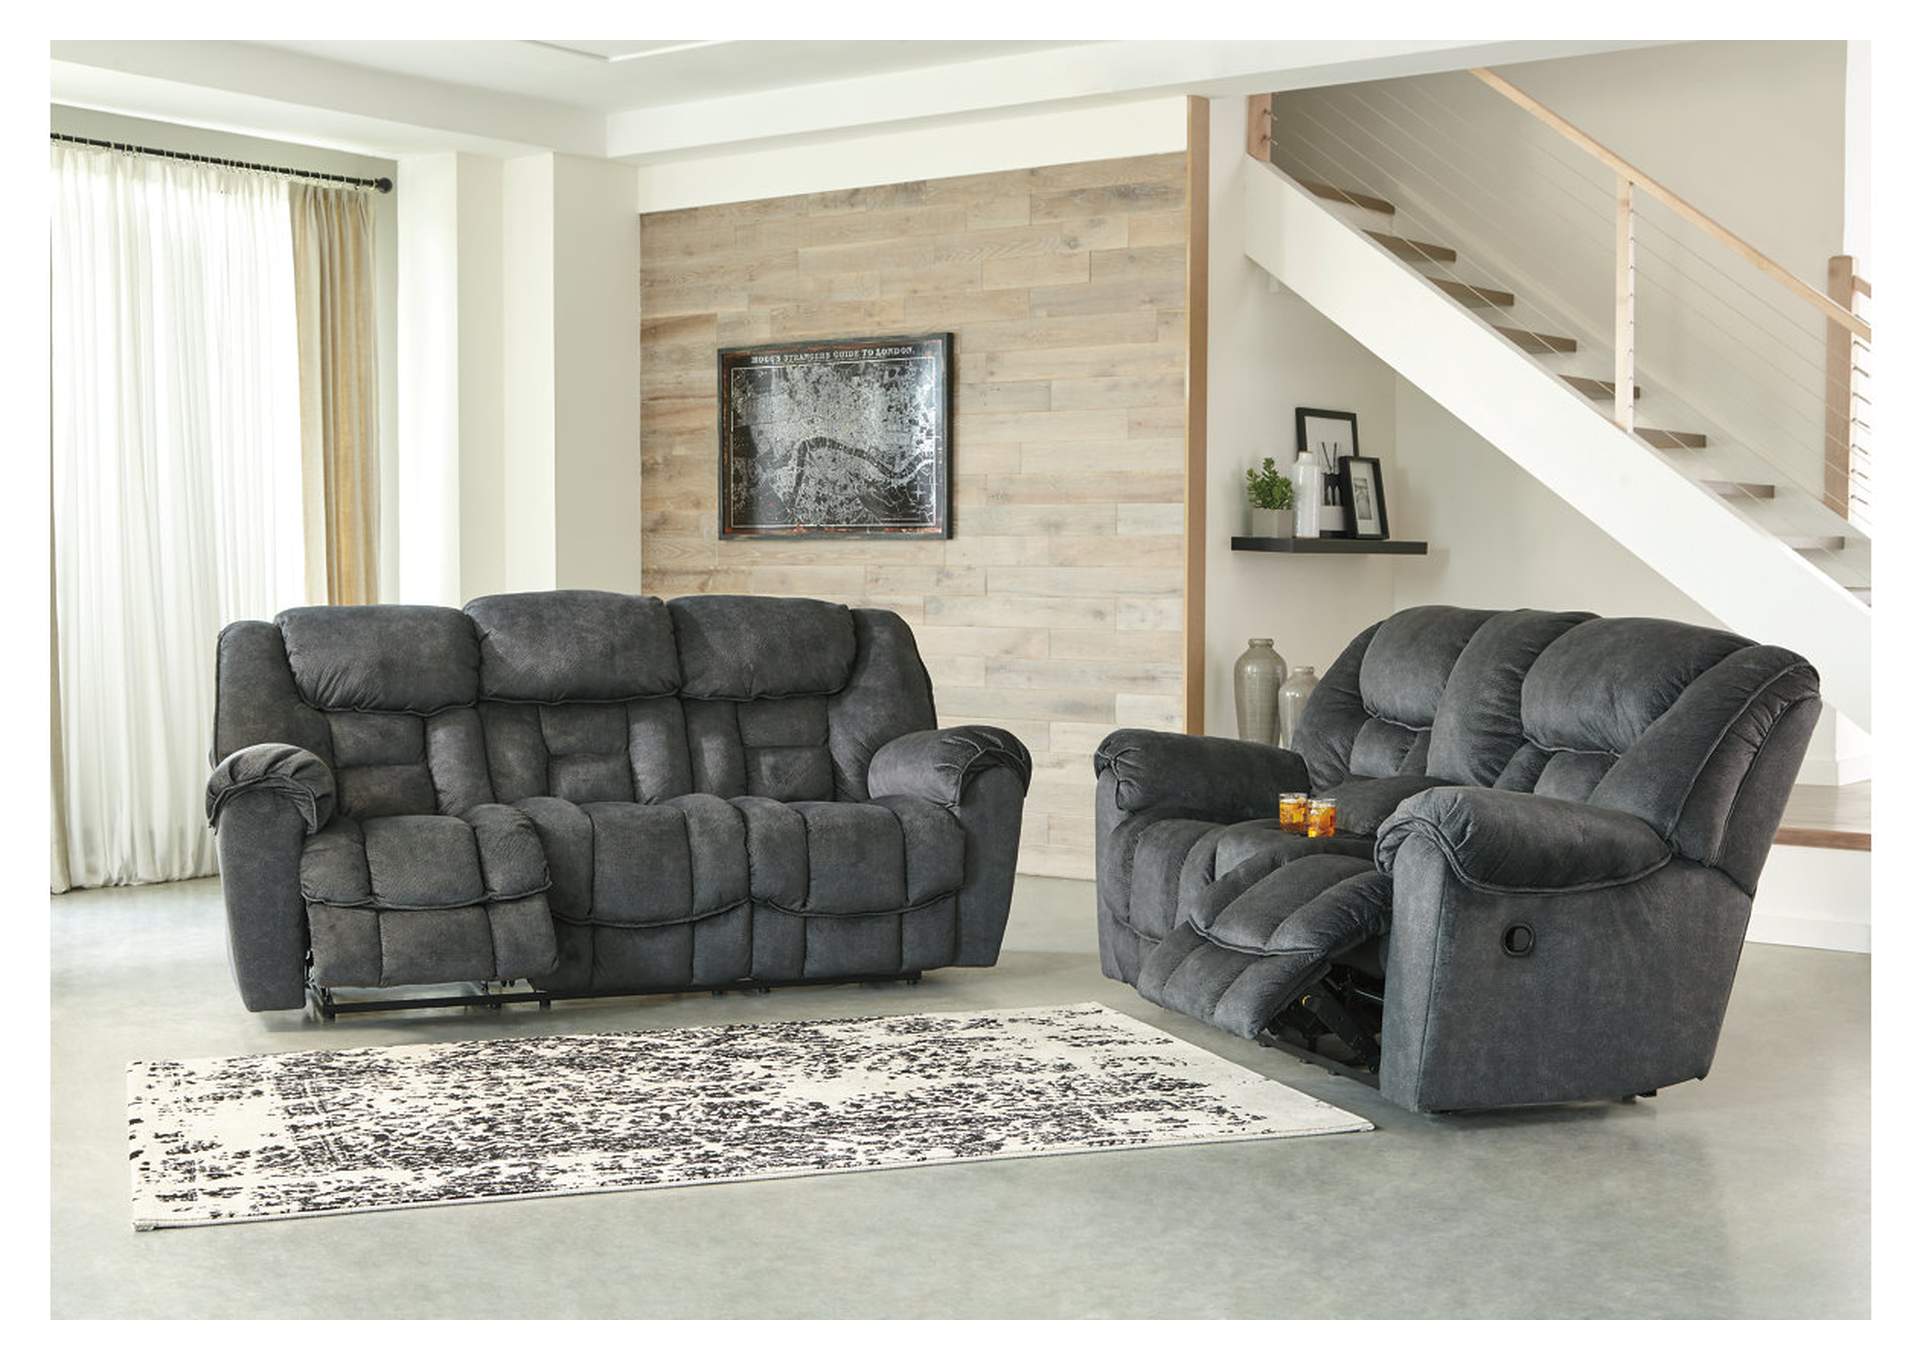 Capehorn Reclining Sofa and Loveseat Mueblería Ashley